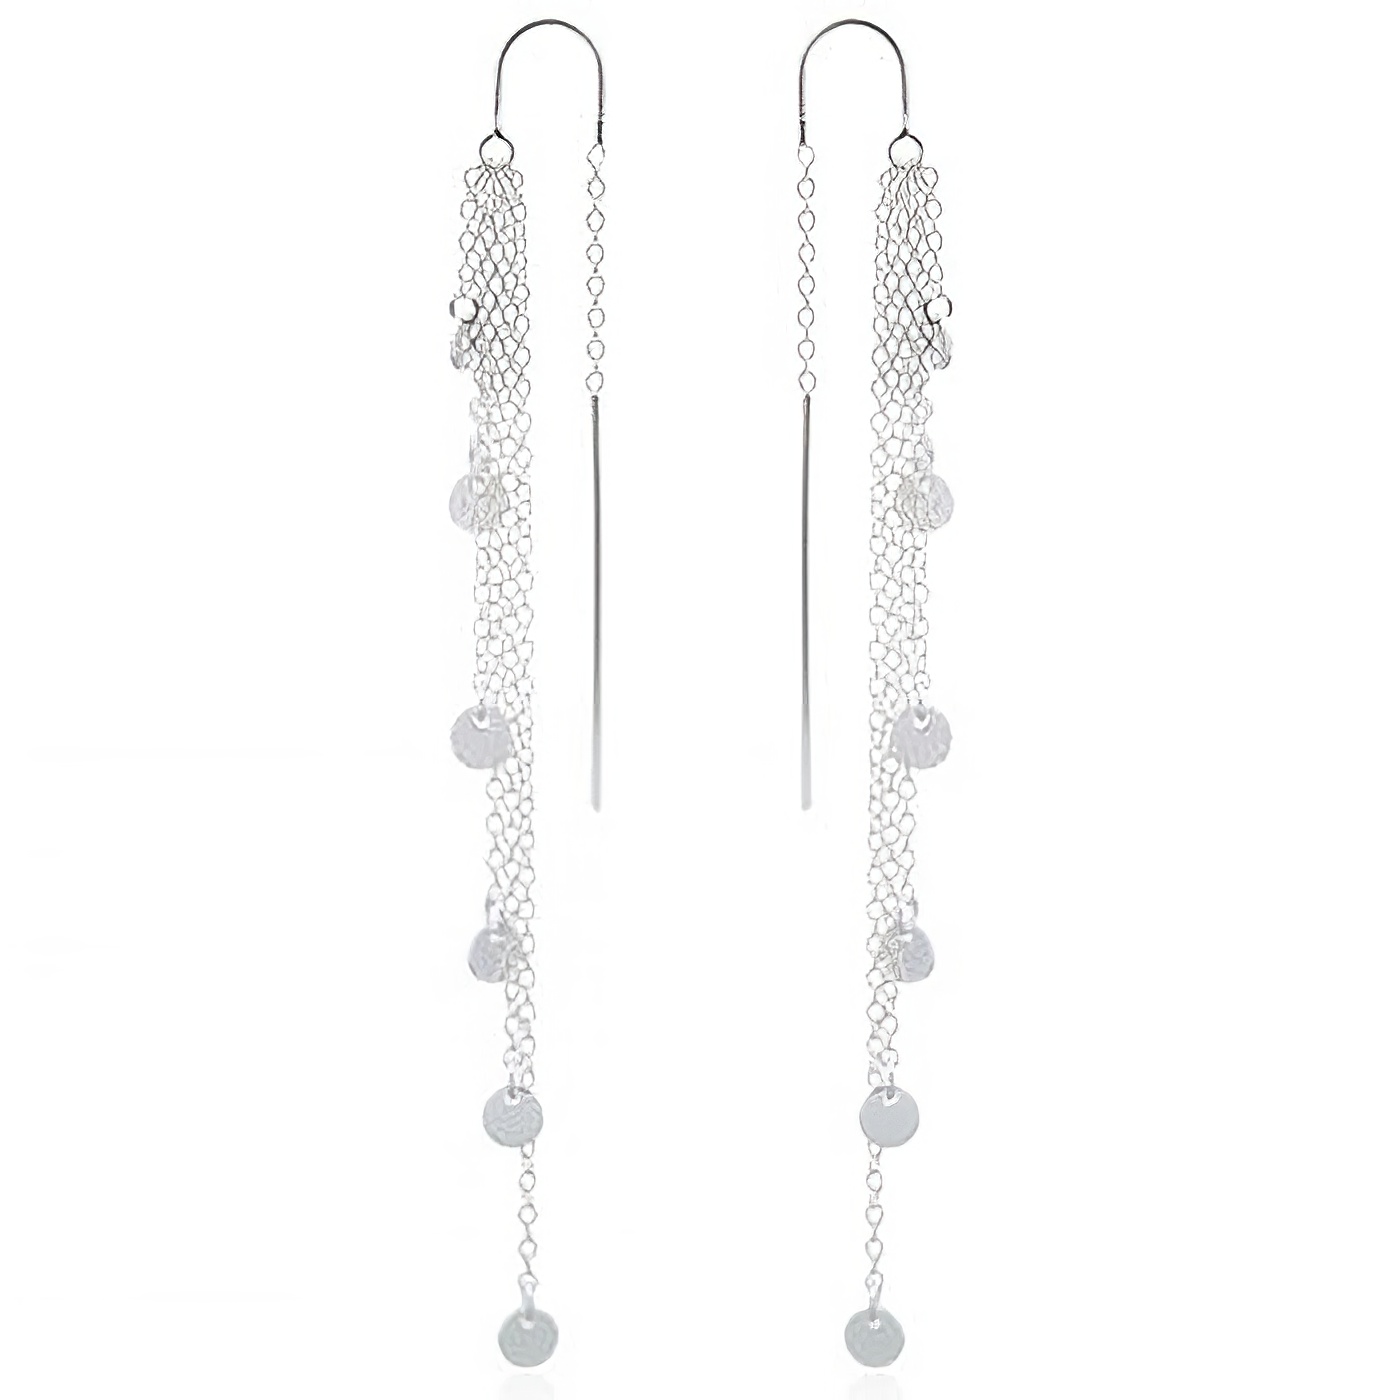 Sparking Discs On Layered Chains Silver Threader Earrings by BeYindi 